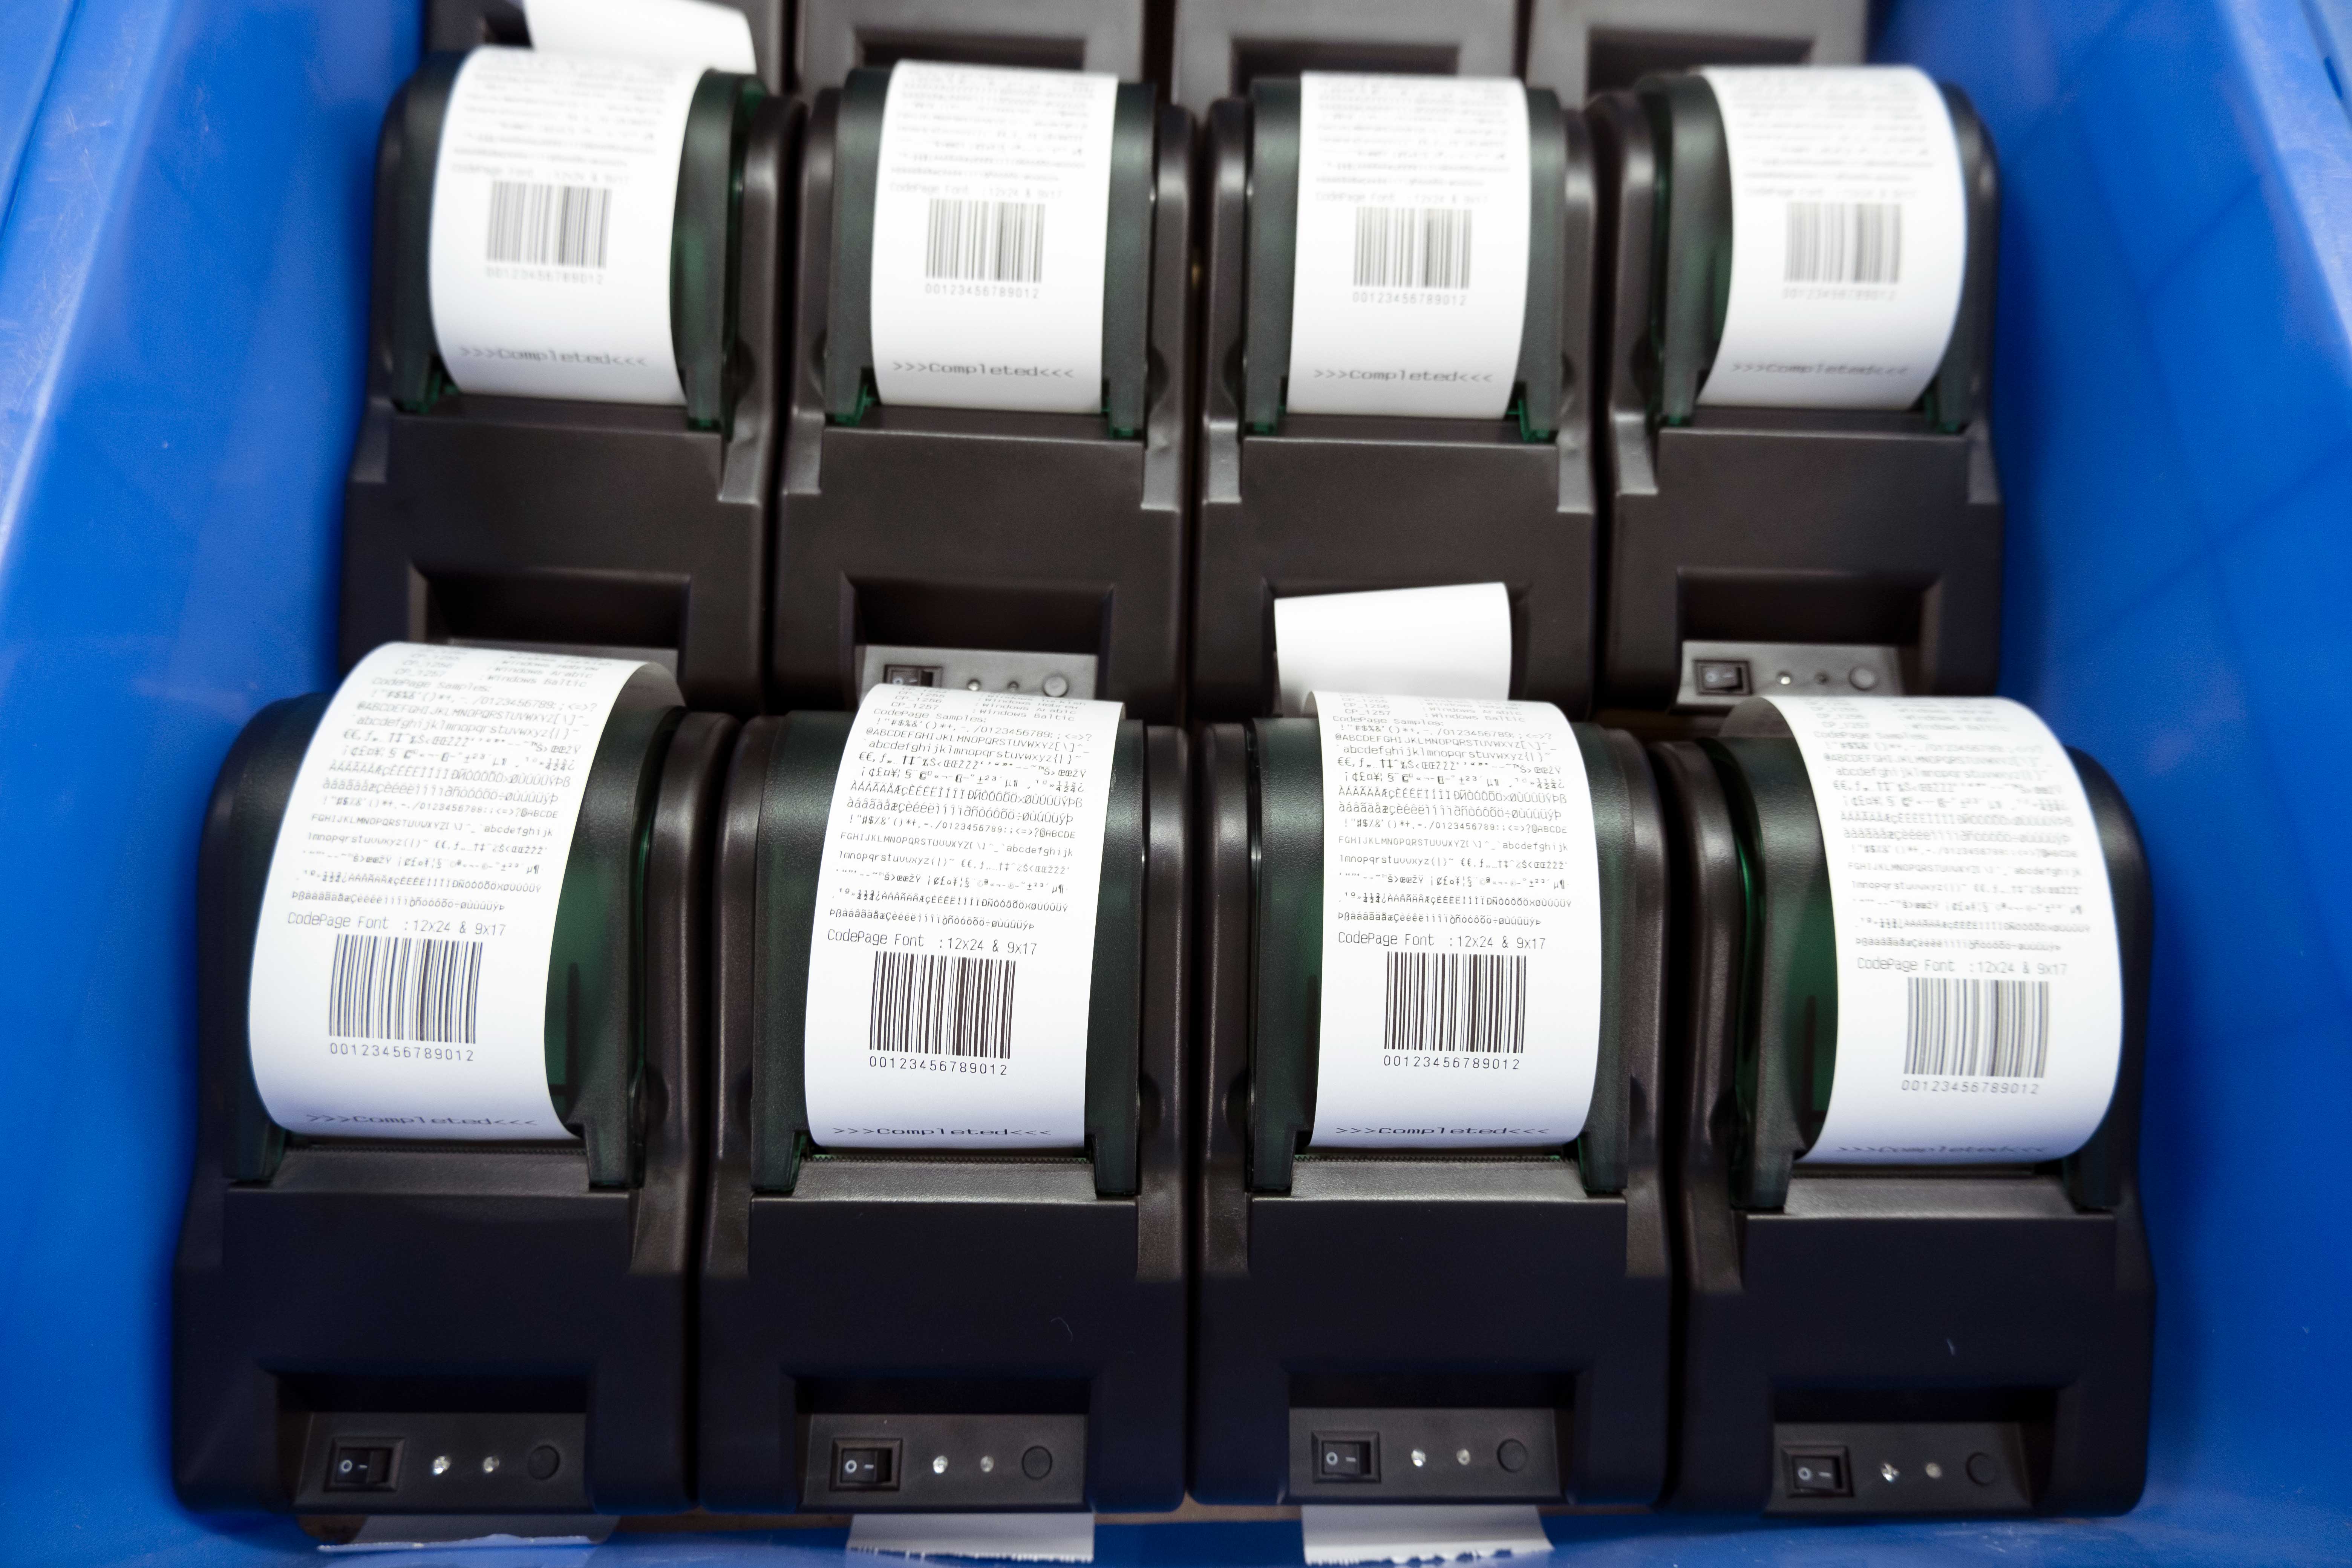 Thermal transfer printers help the construction of green, low-carbon and resilient cities